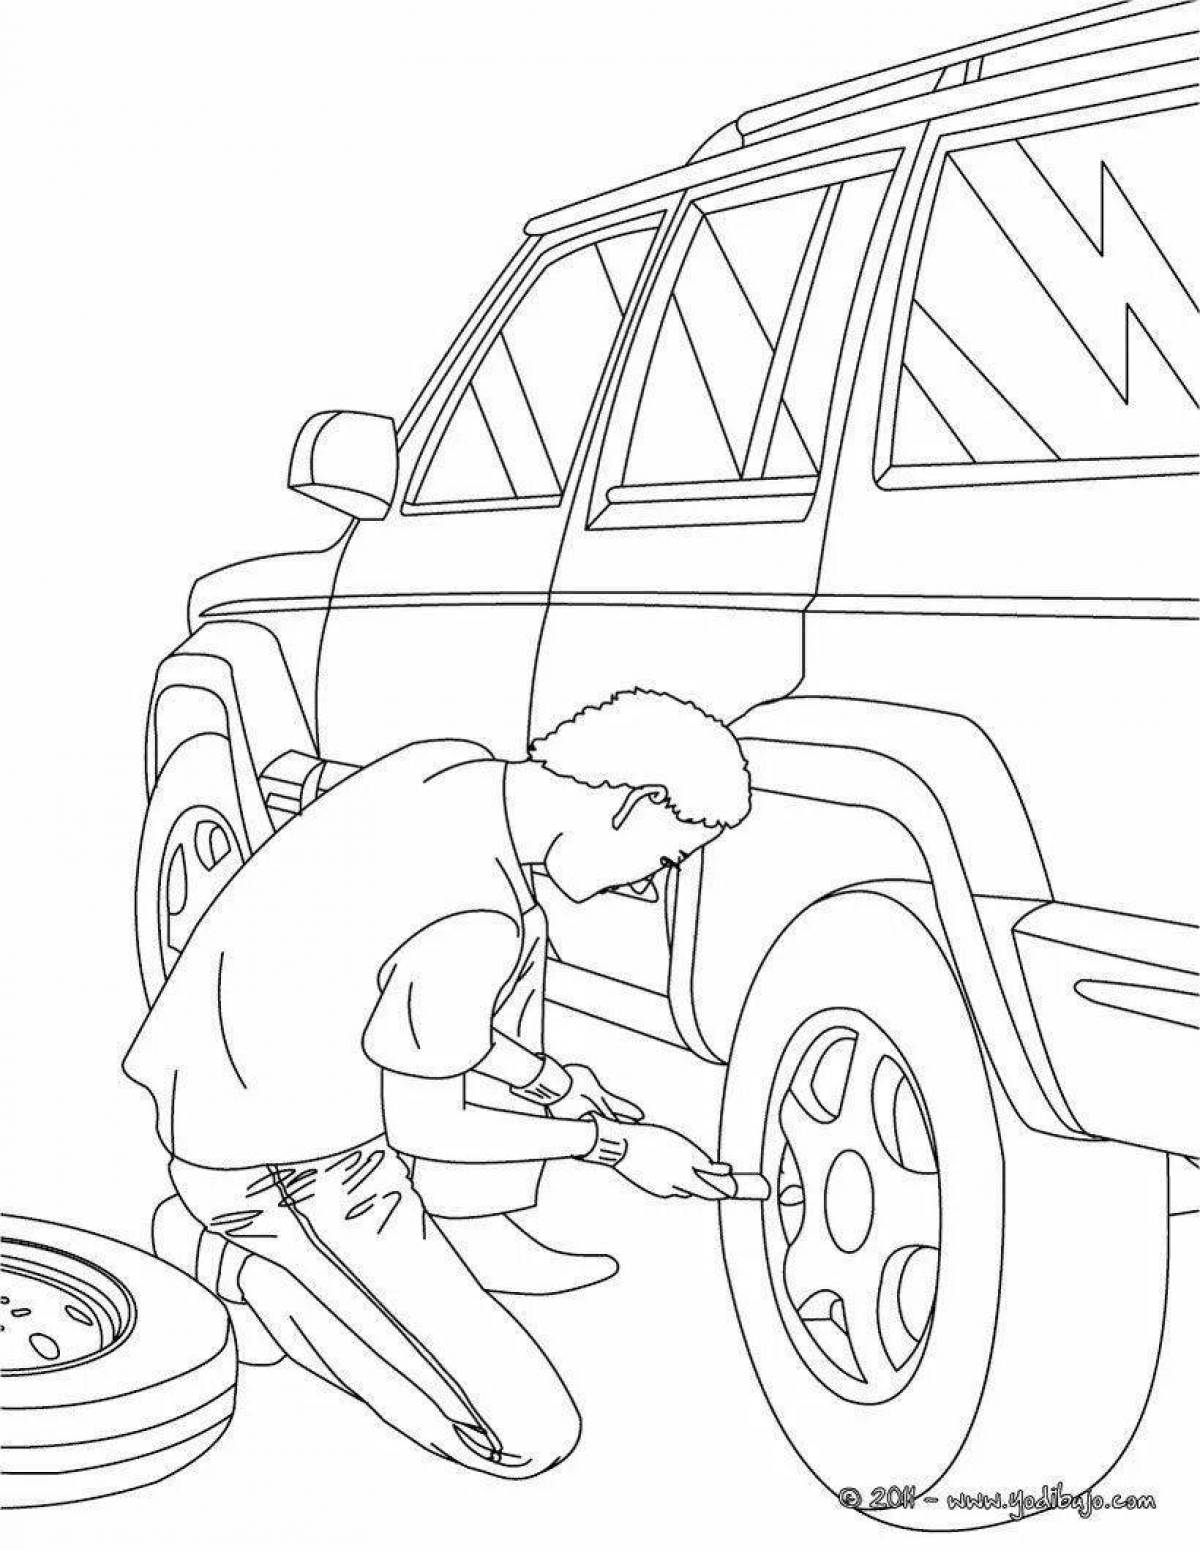 Coloring great car mechanic for kids